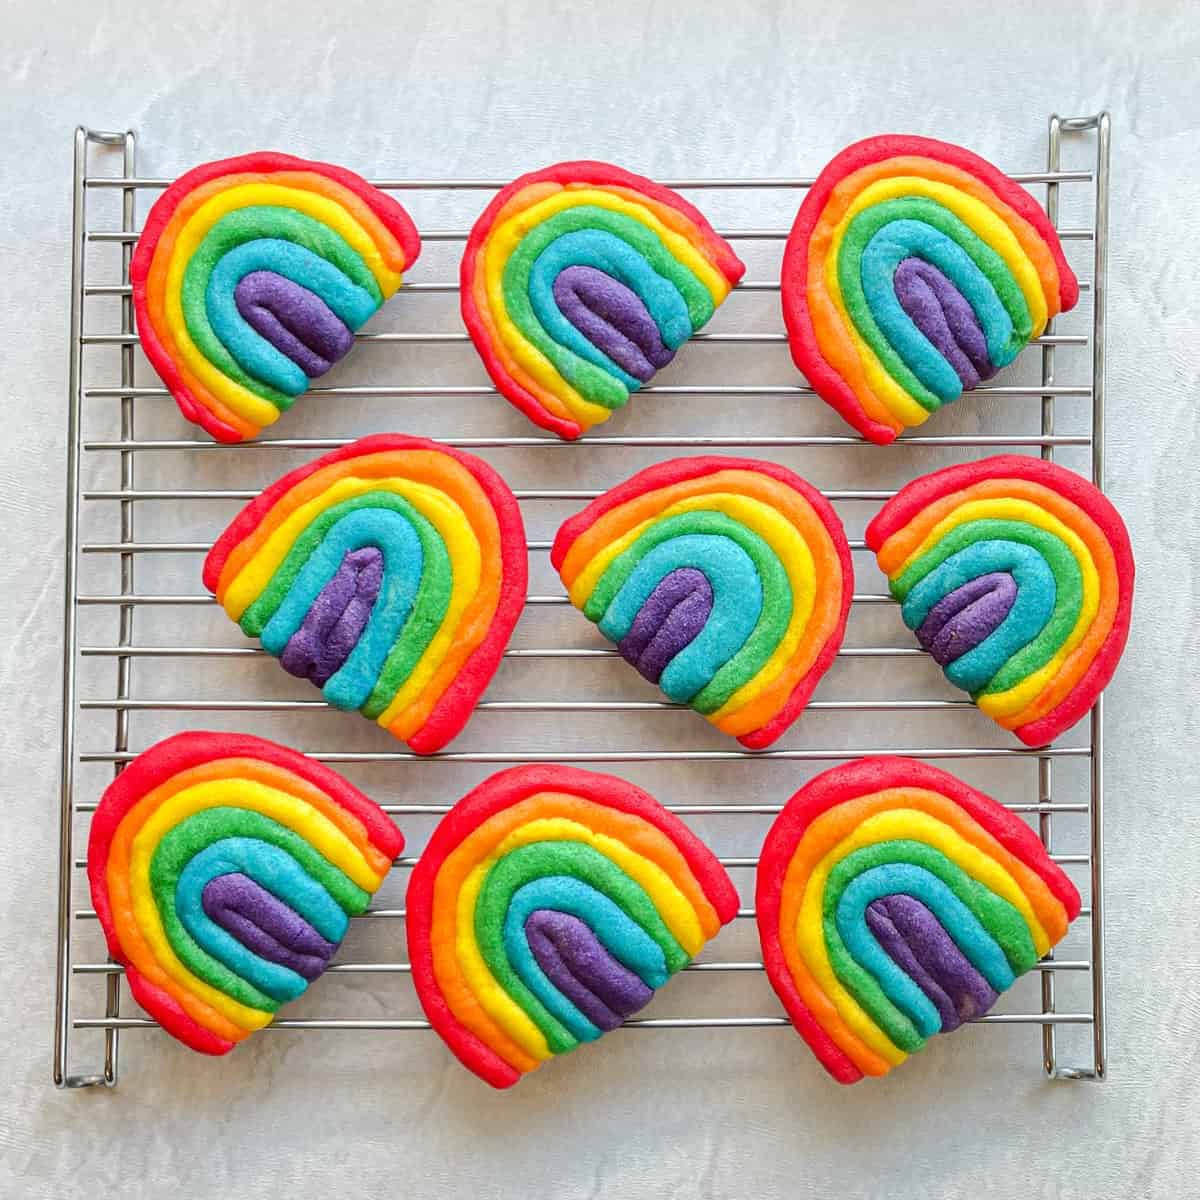 Rainbow cookies on a cooling rack showcasing unique cookie recipes.